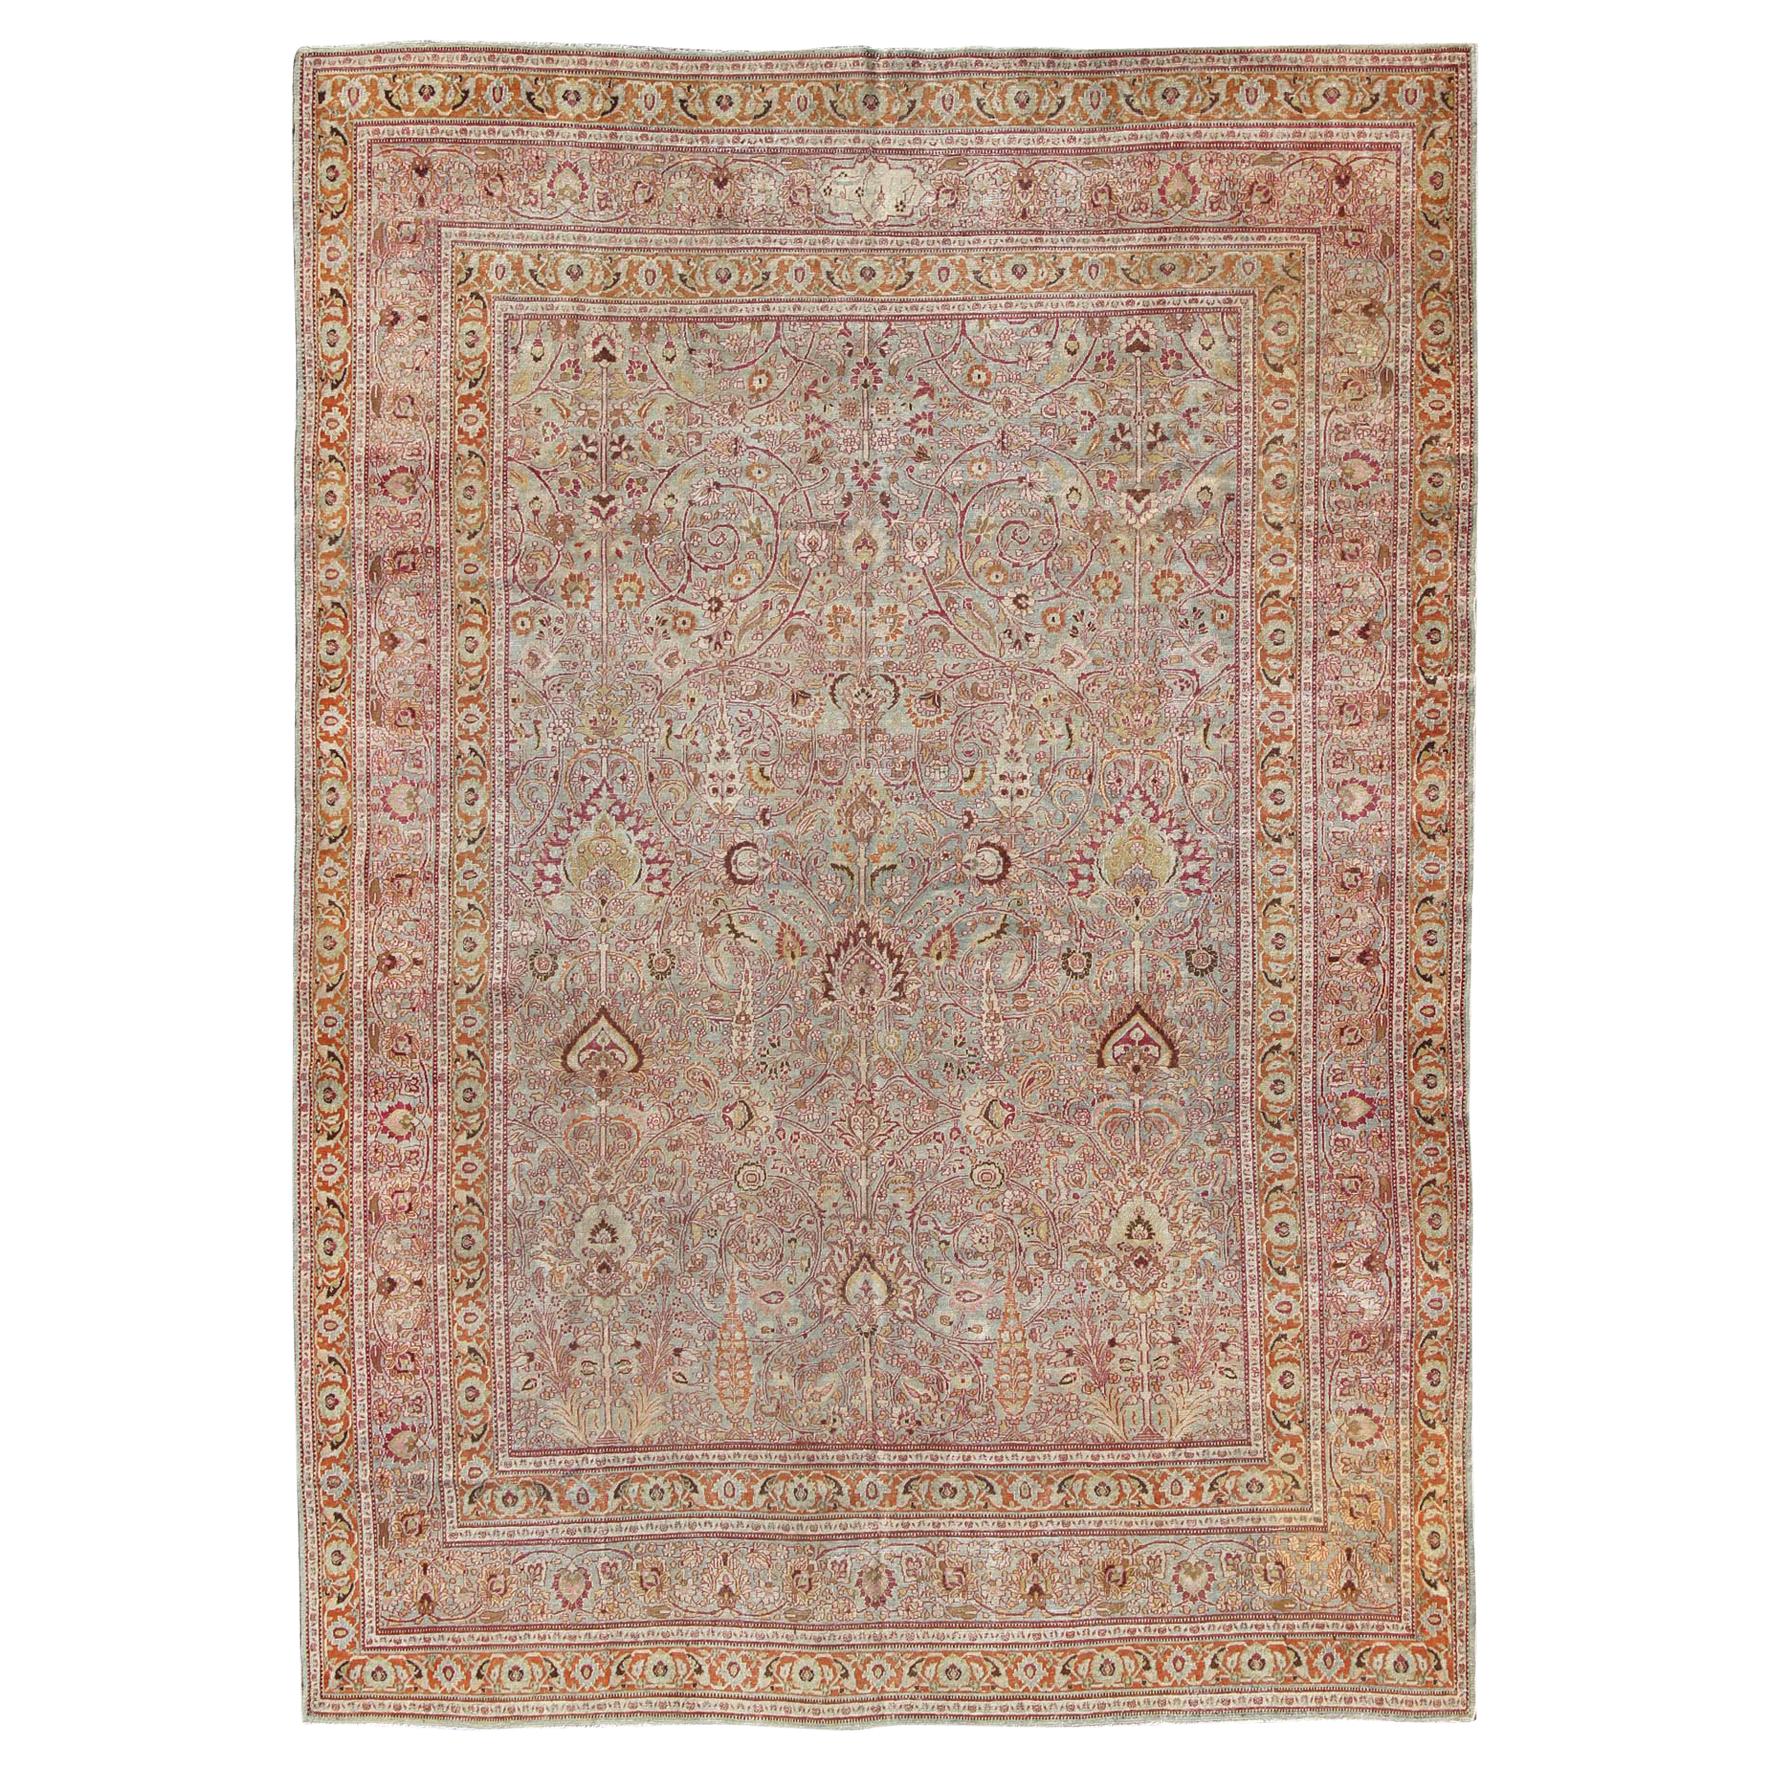 Antique Persian Khorassan Rug with All-Over Floral Design in Orange, Red, Pink